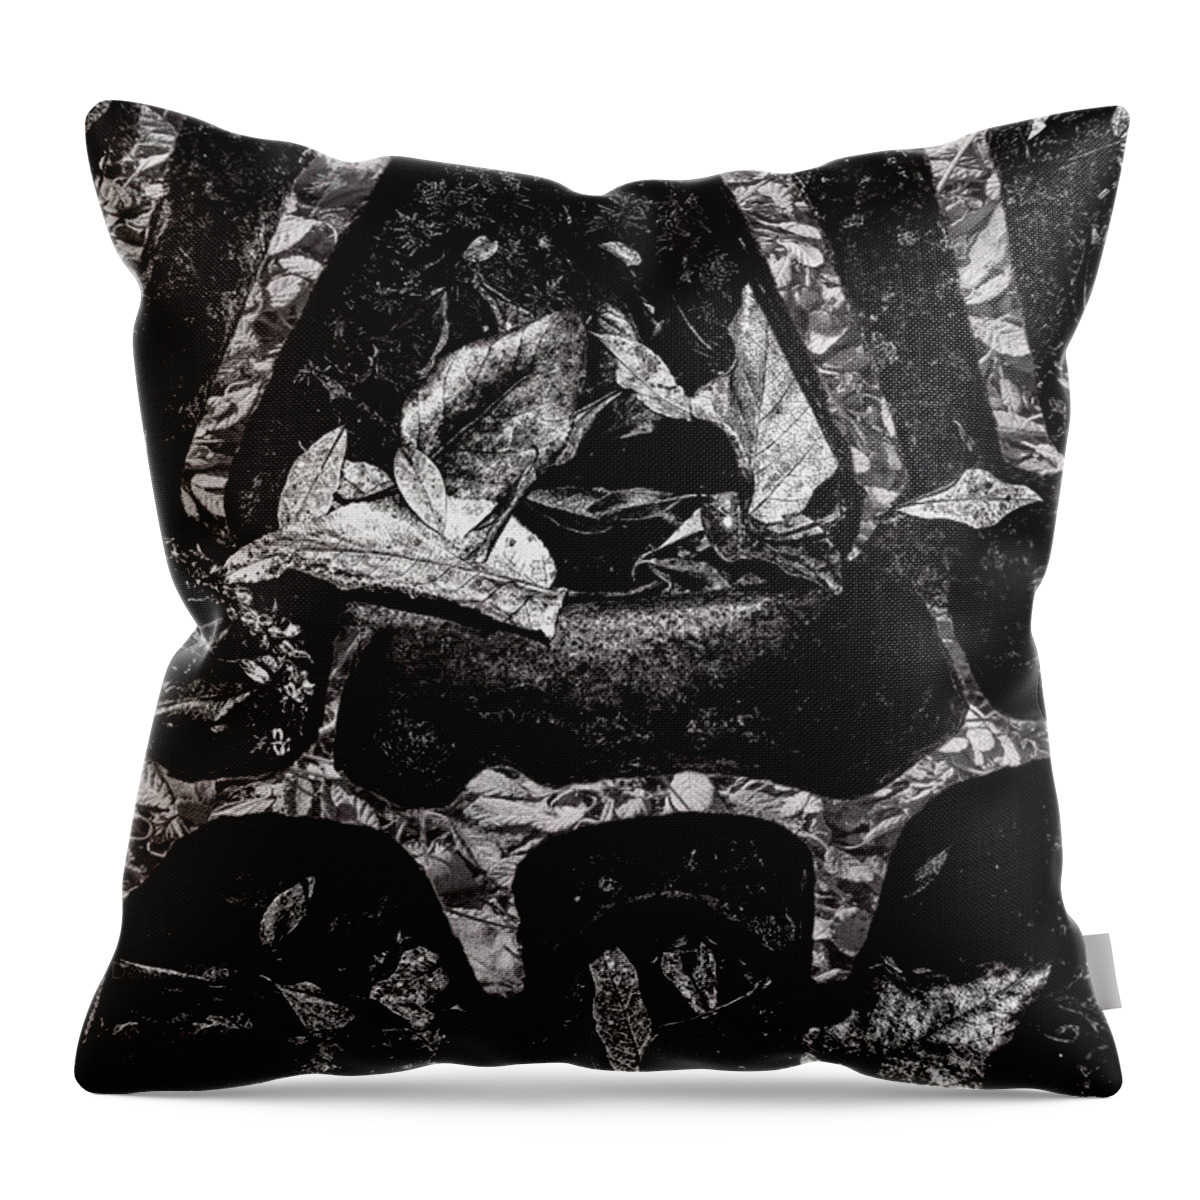 Leaves Throw Pillow featuring the photograph Abstract Gear by Fred Denner